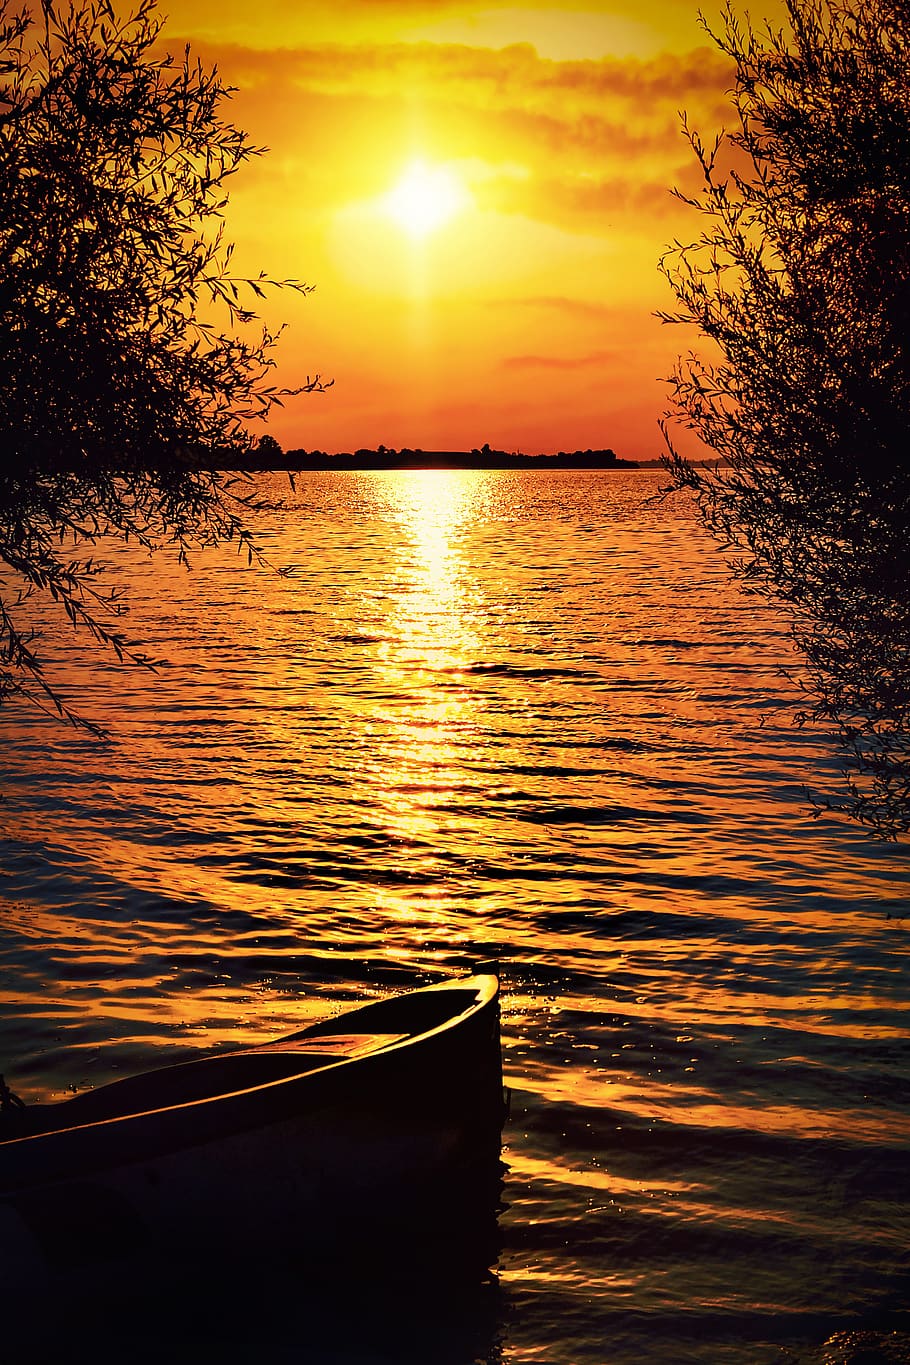 sunset, boat, lacquer, sky, offer, reflection, landscape, water, beauty in nature, tranquility